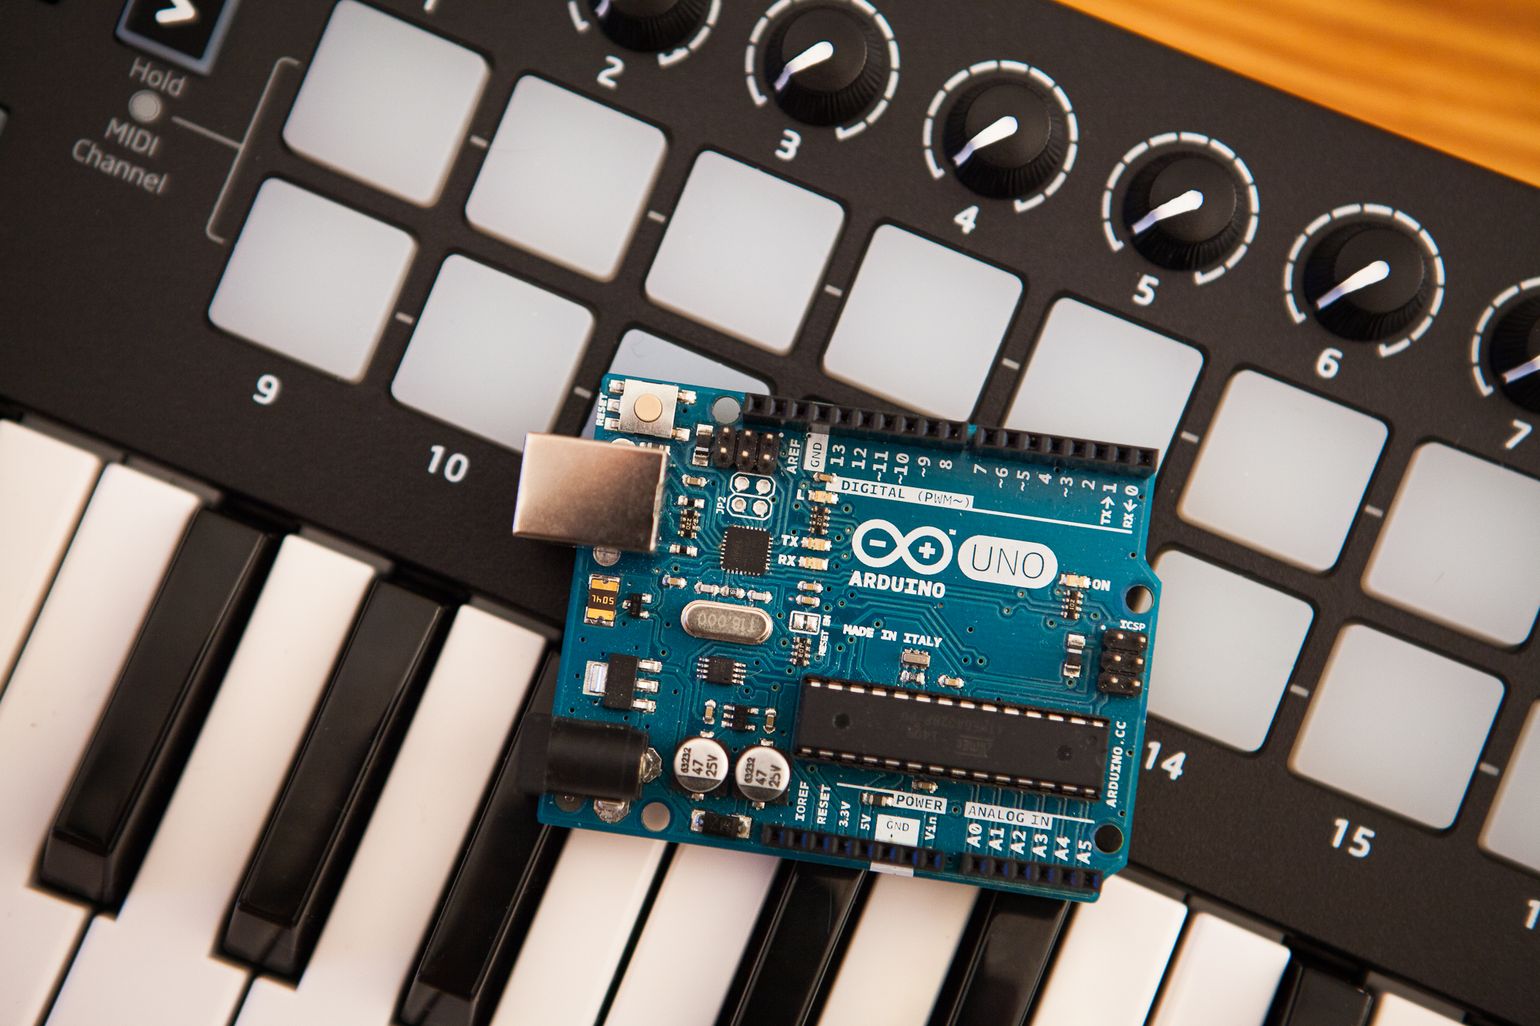 How To Send MIDI Channel 1 To Arduino